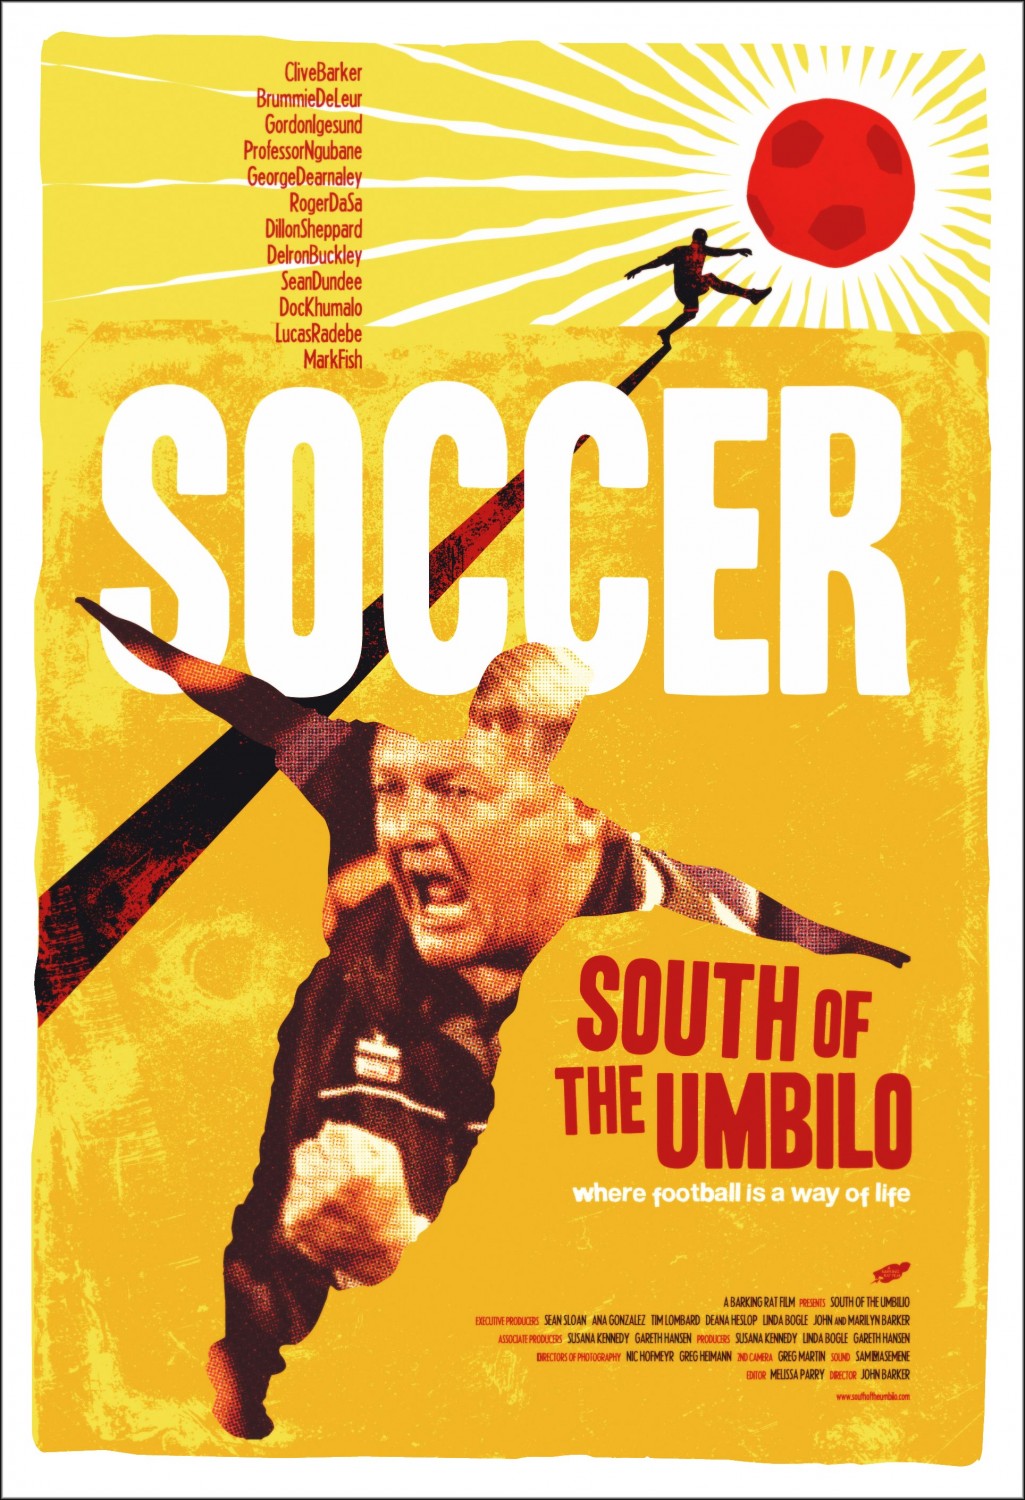 Extra Large Movie Poster Image for Soccer: South of the Umbilo 